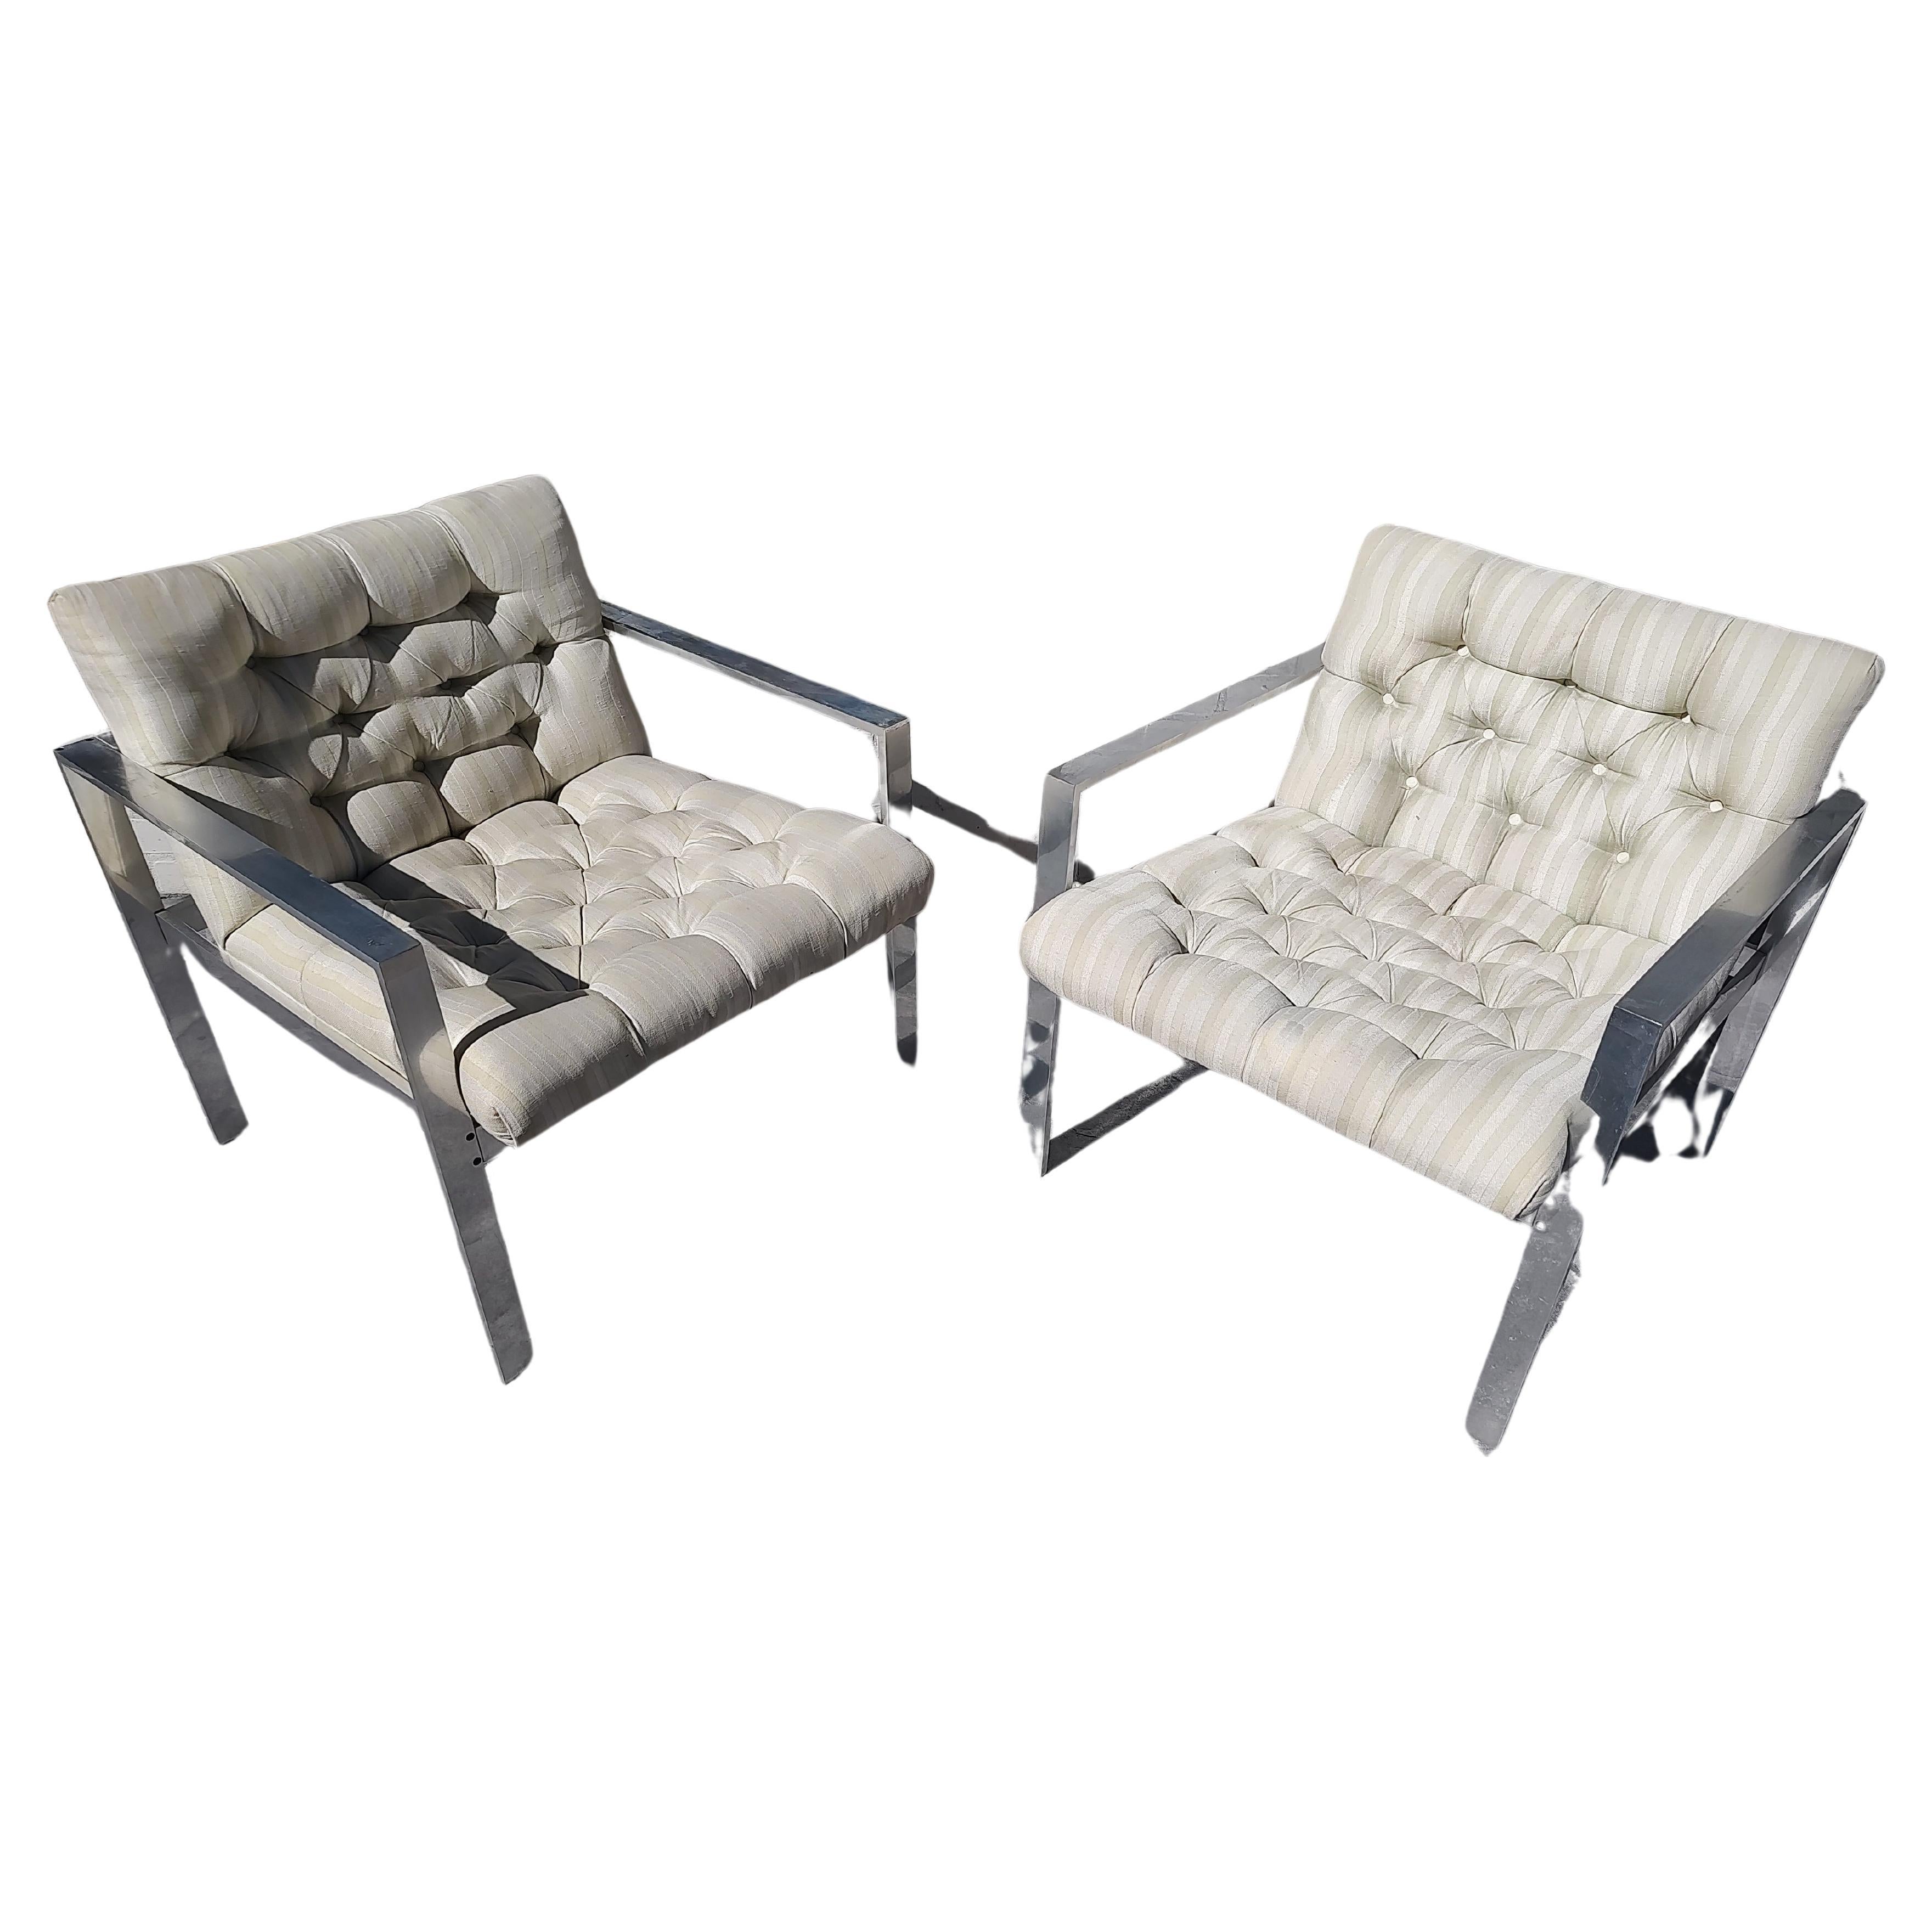 Pair of Mid-Century Modern Tufted Aluminum Lounge Chairs by Harvey Probber For Sale 2